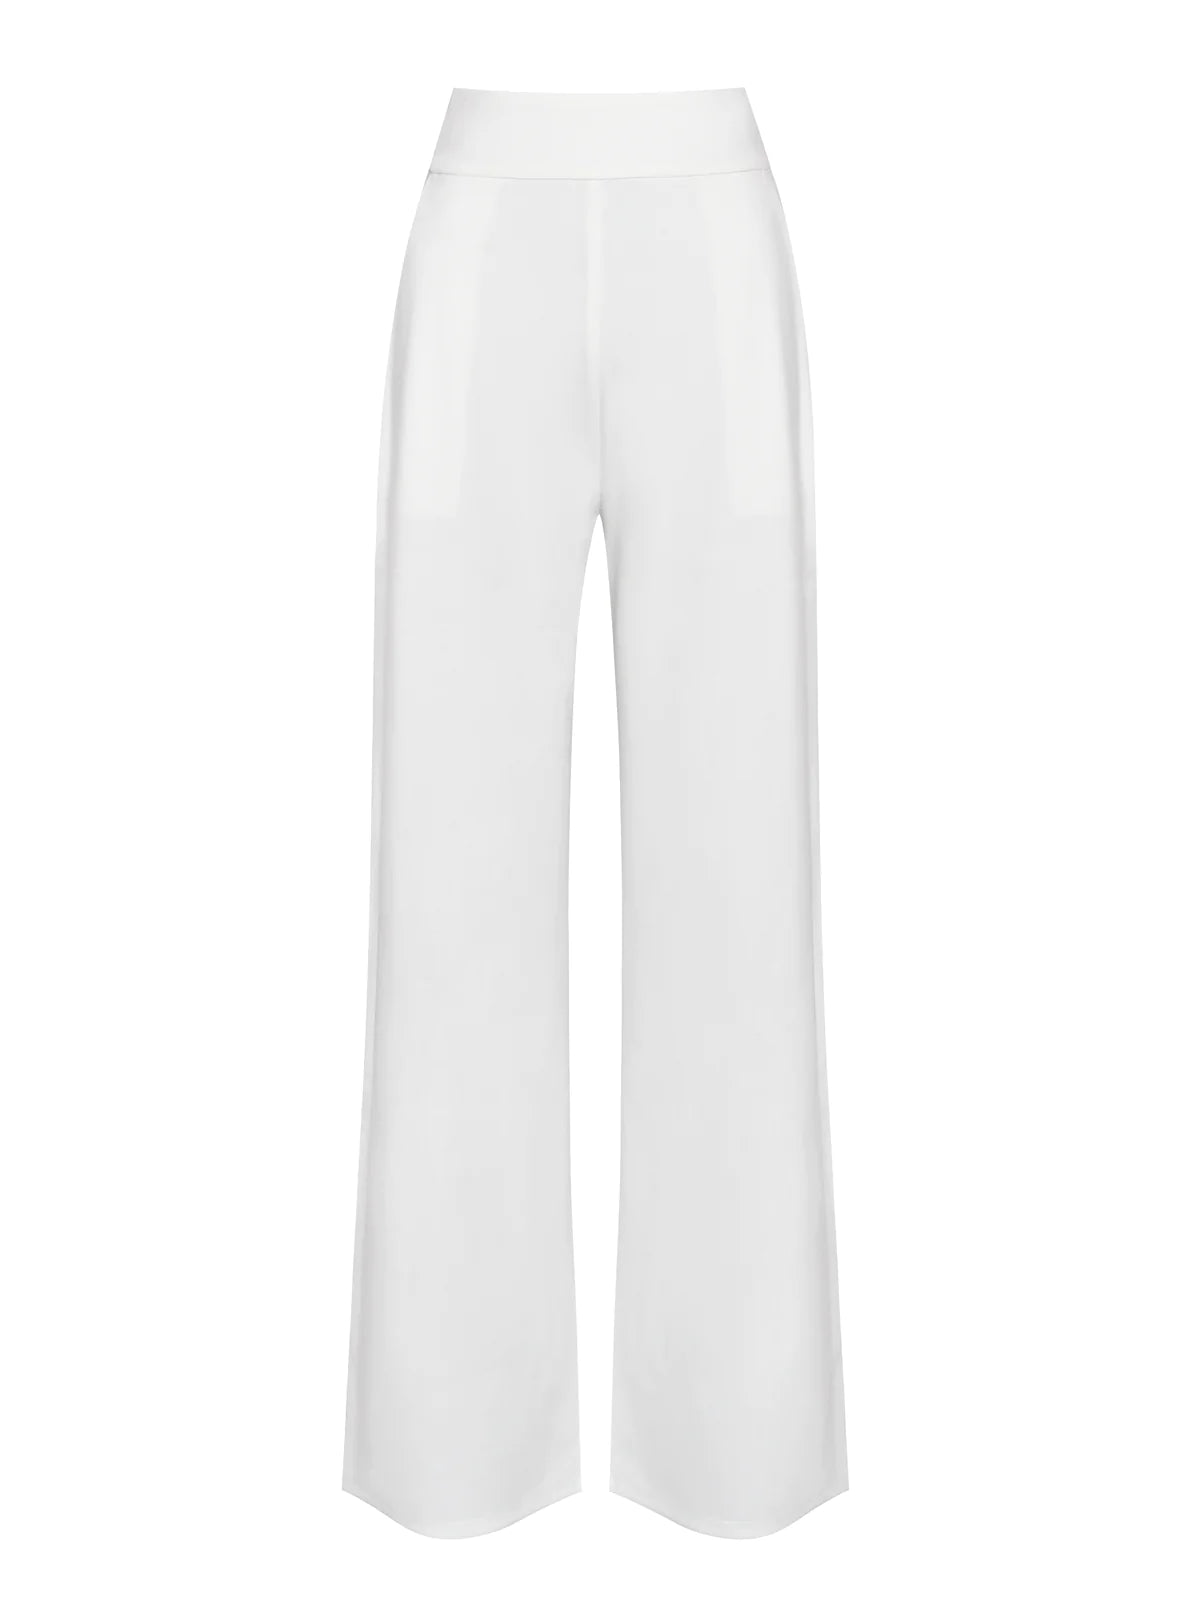 Never Enough White Stretch Crepe Wide Leg Trousers